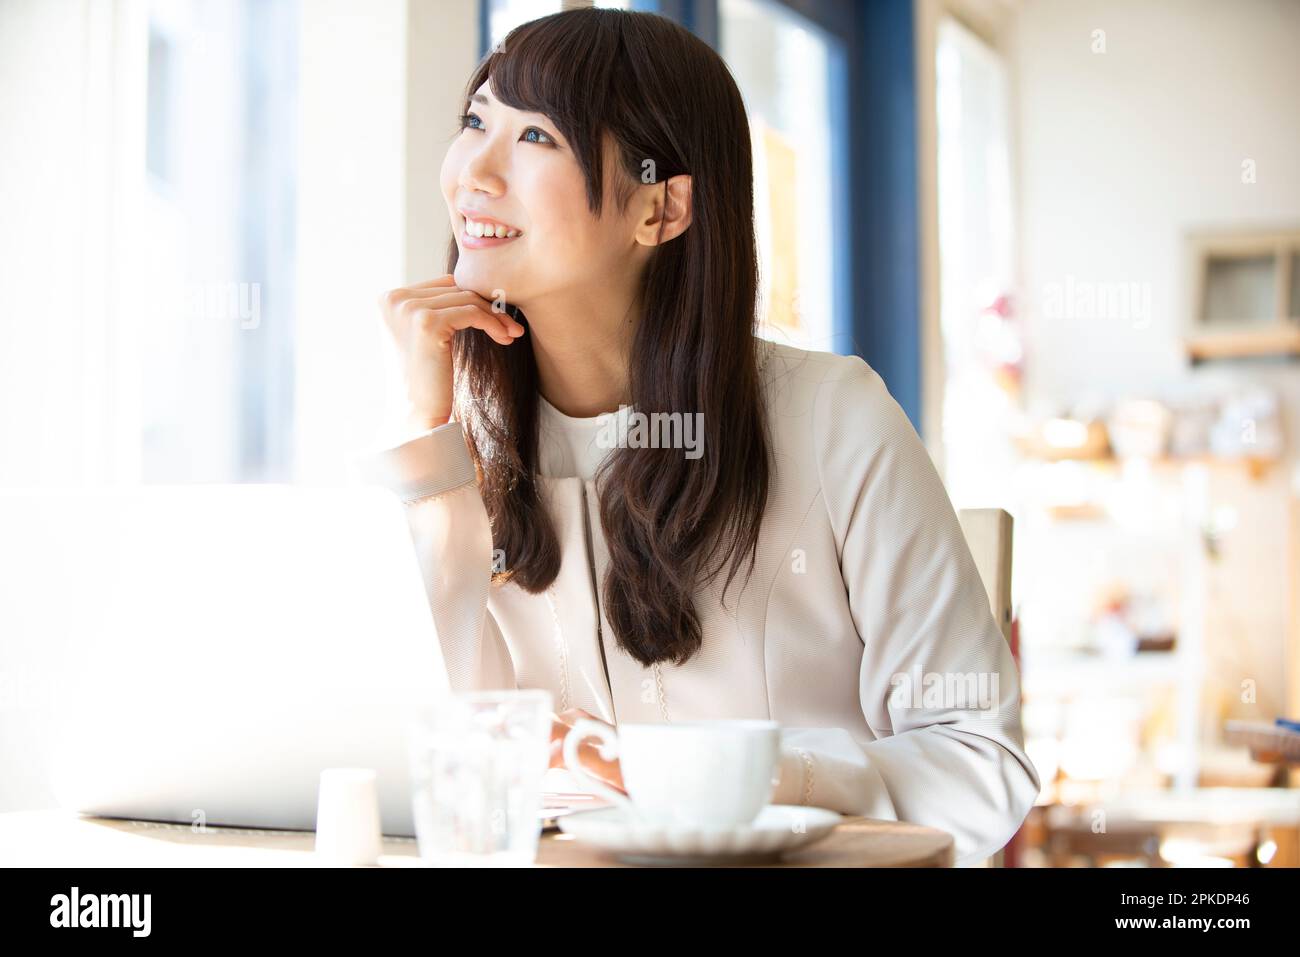 Woman working at a café Stock Photo